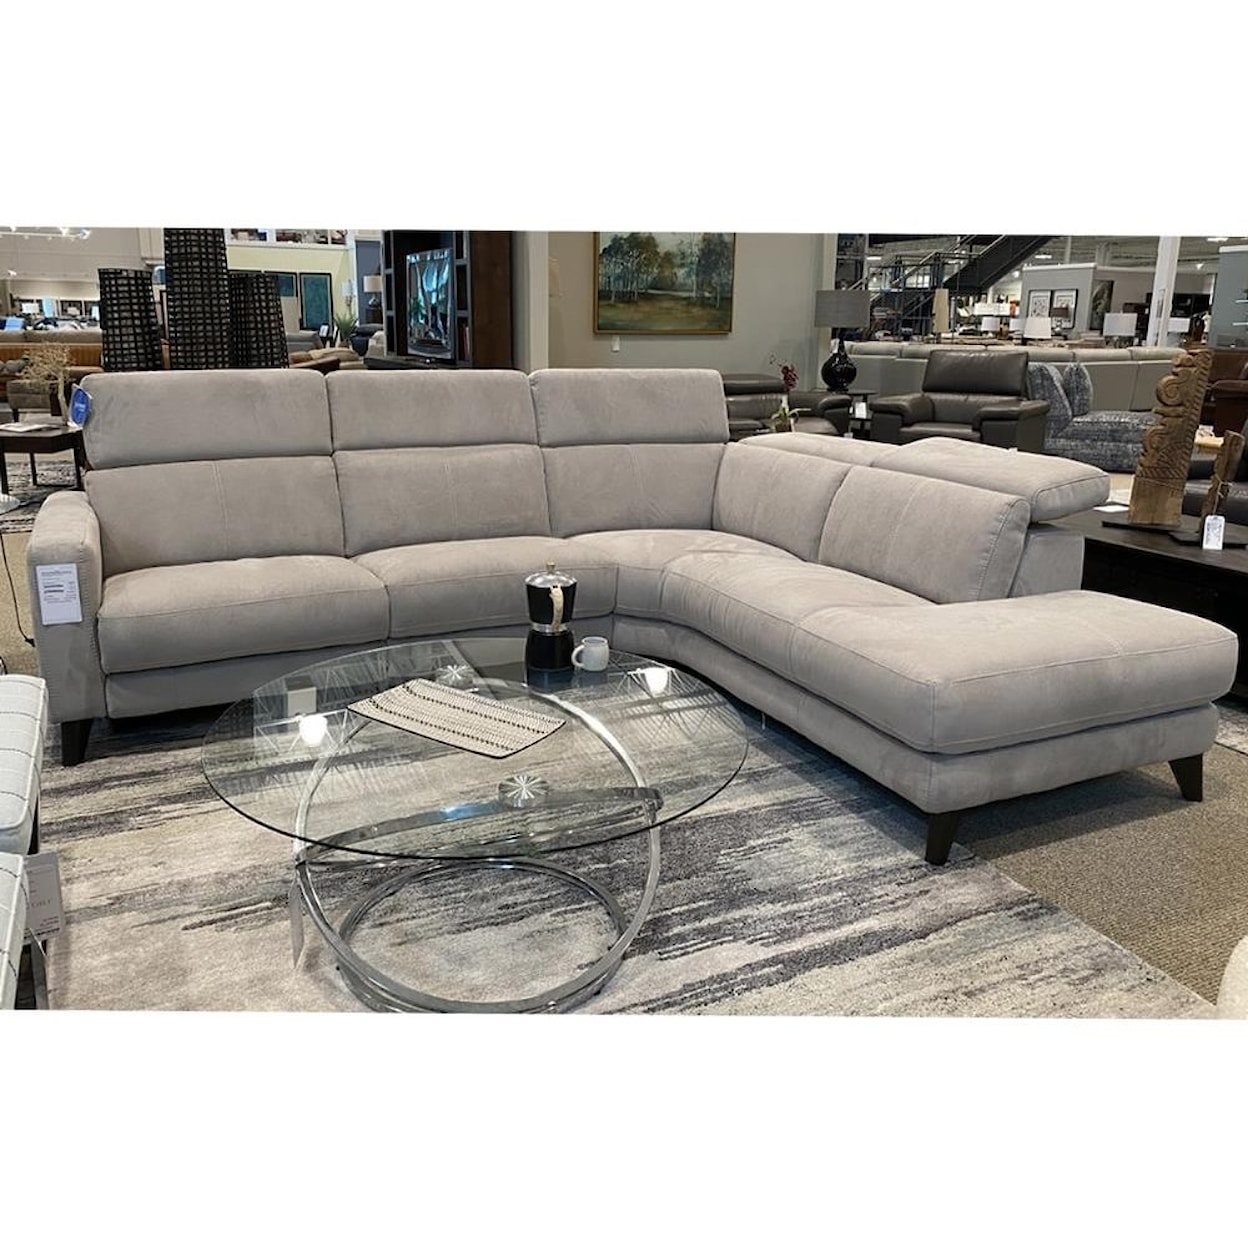 Belfort Select Colin Reclining Sectional